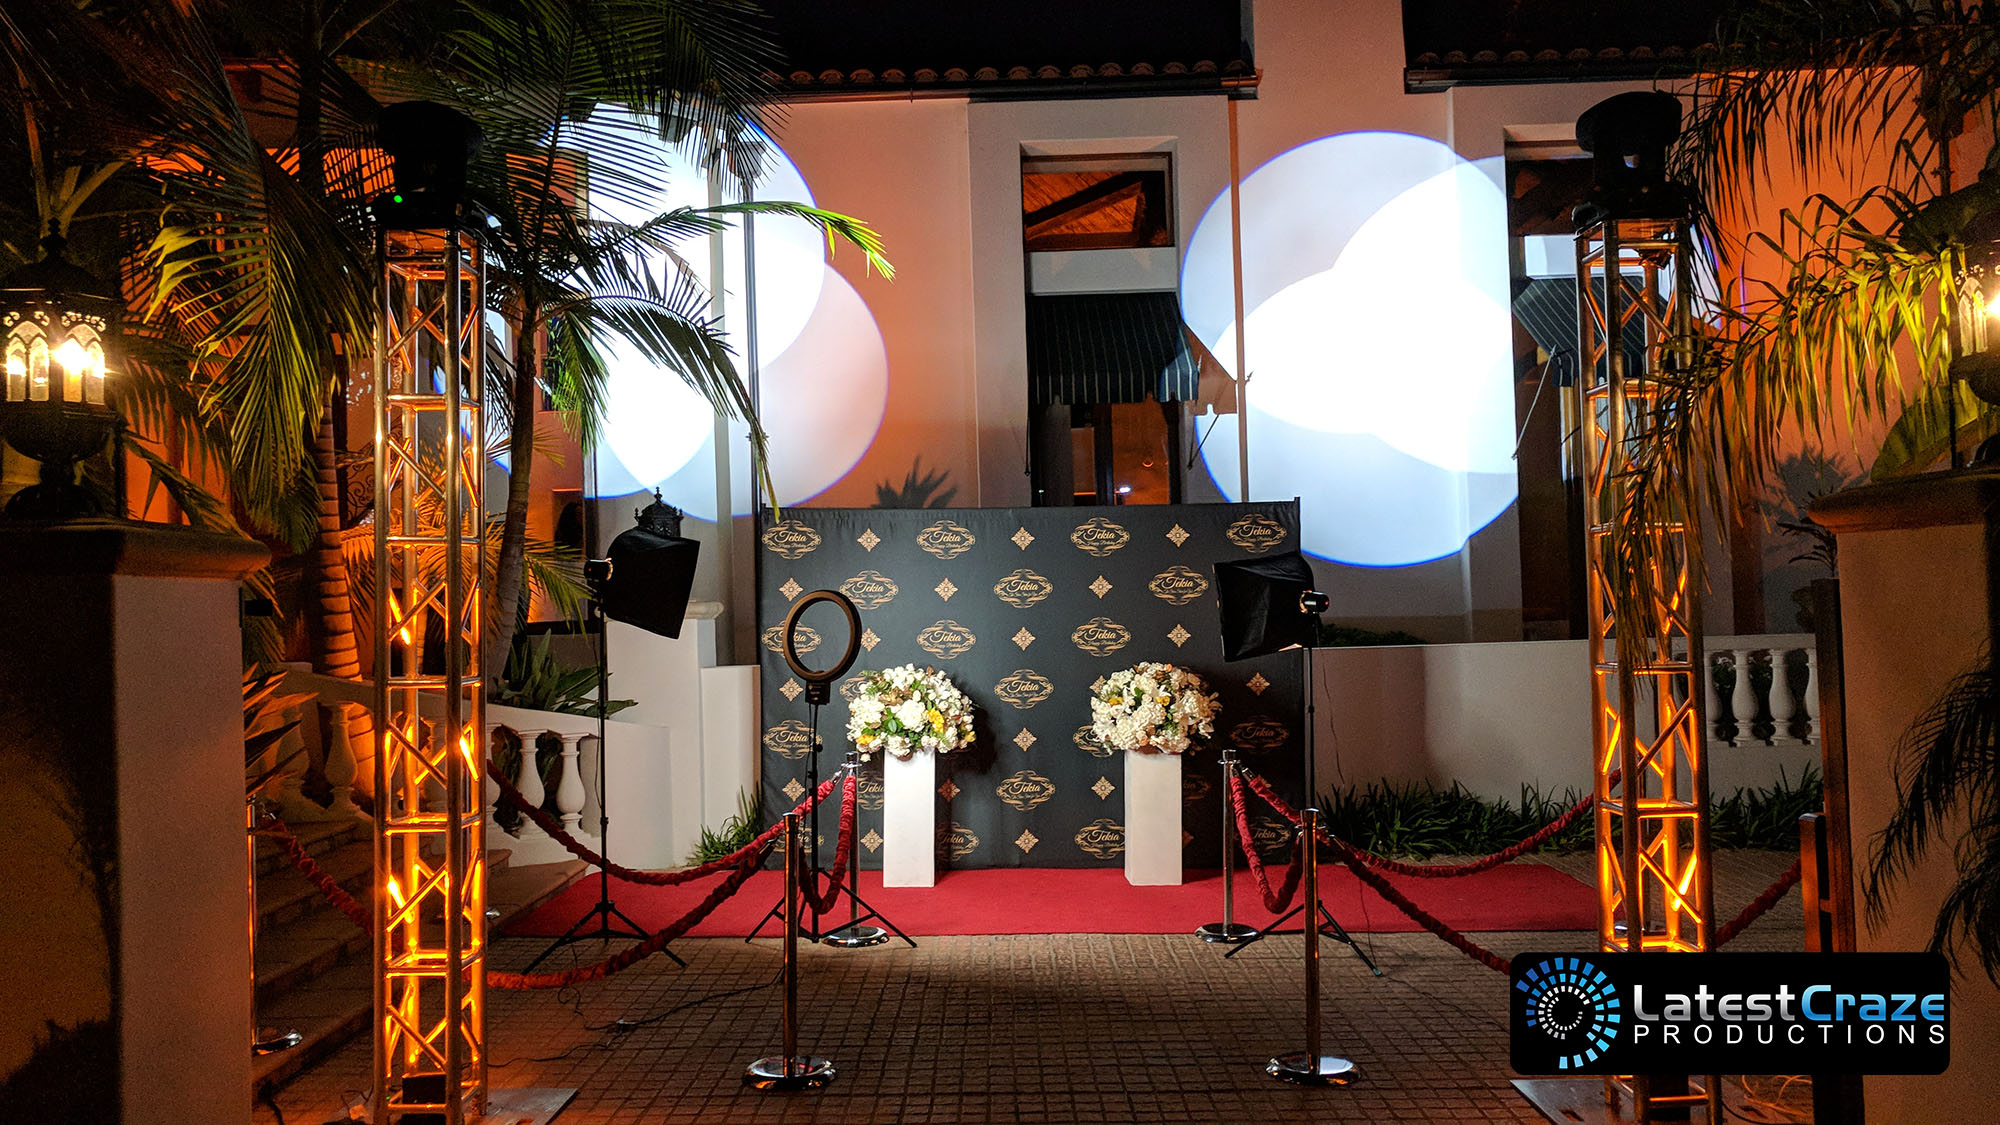 hollywood-academy-awards-red-carpet-entrance-search-lights-Latest-Craze-Productions